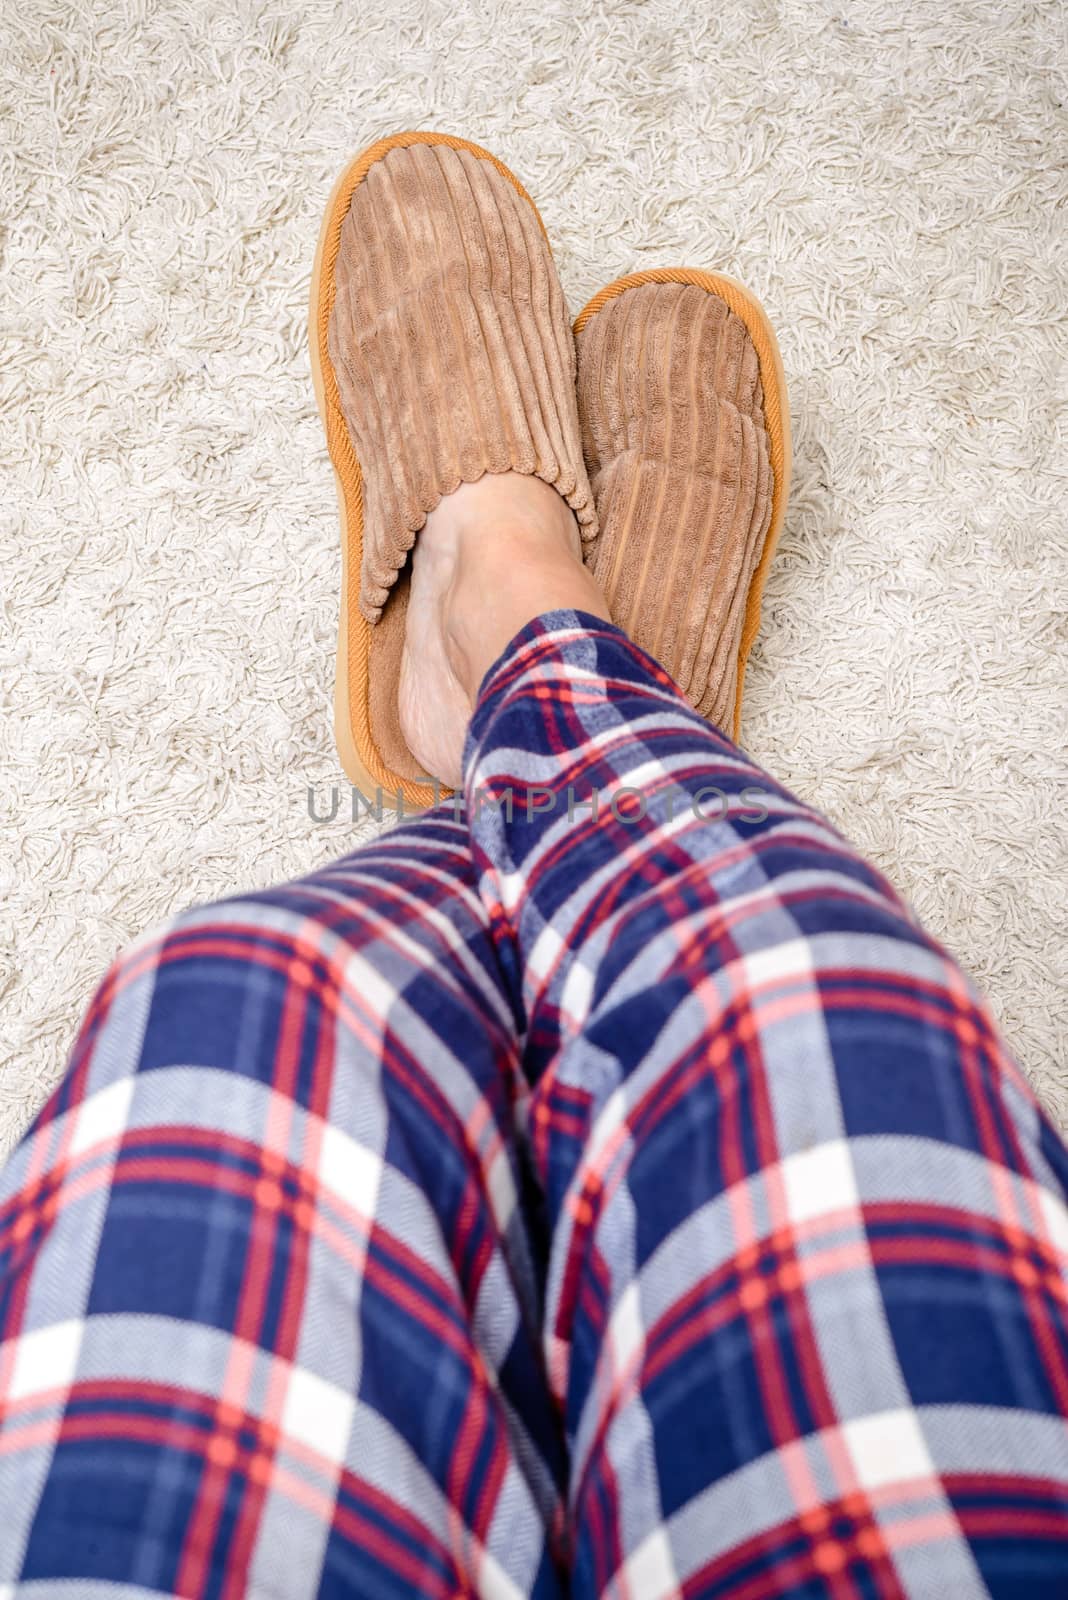 A man with hairy legs, wearing warm slippers and pajamas is relaxing with the feet on a wool carpet